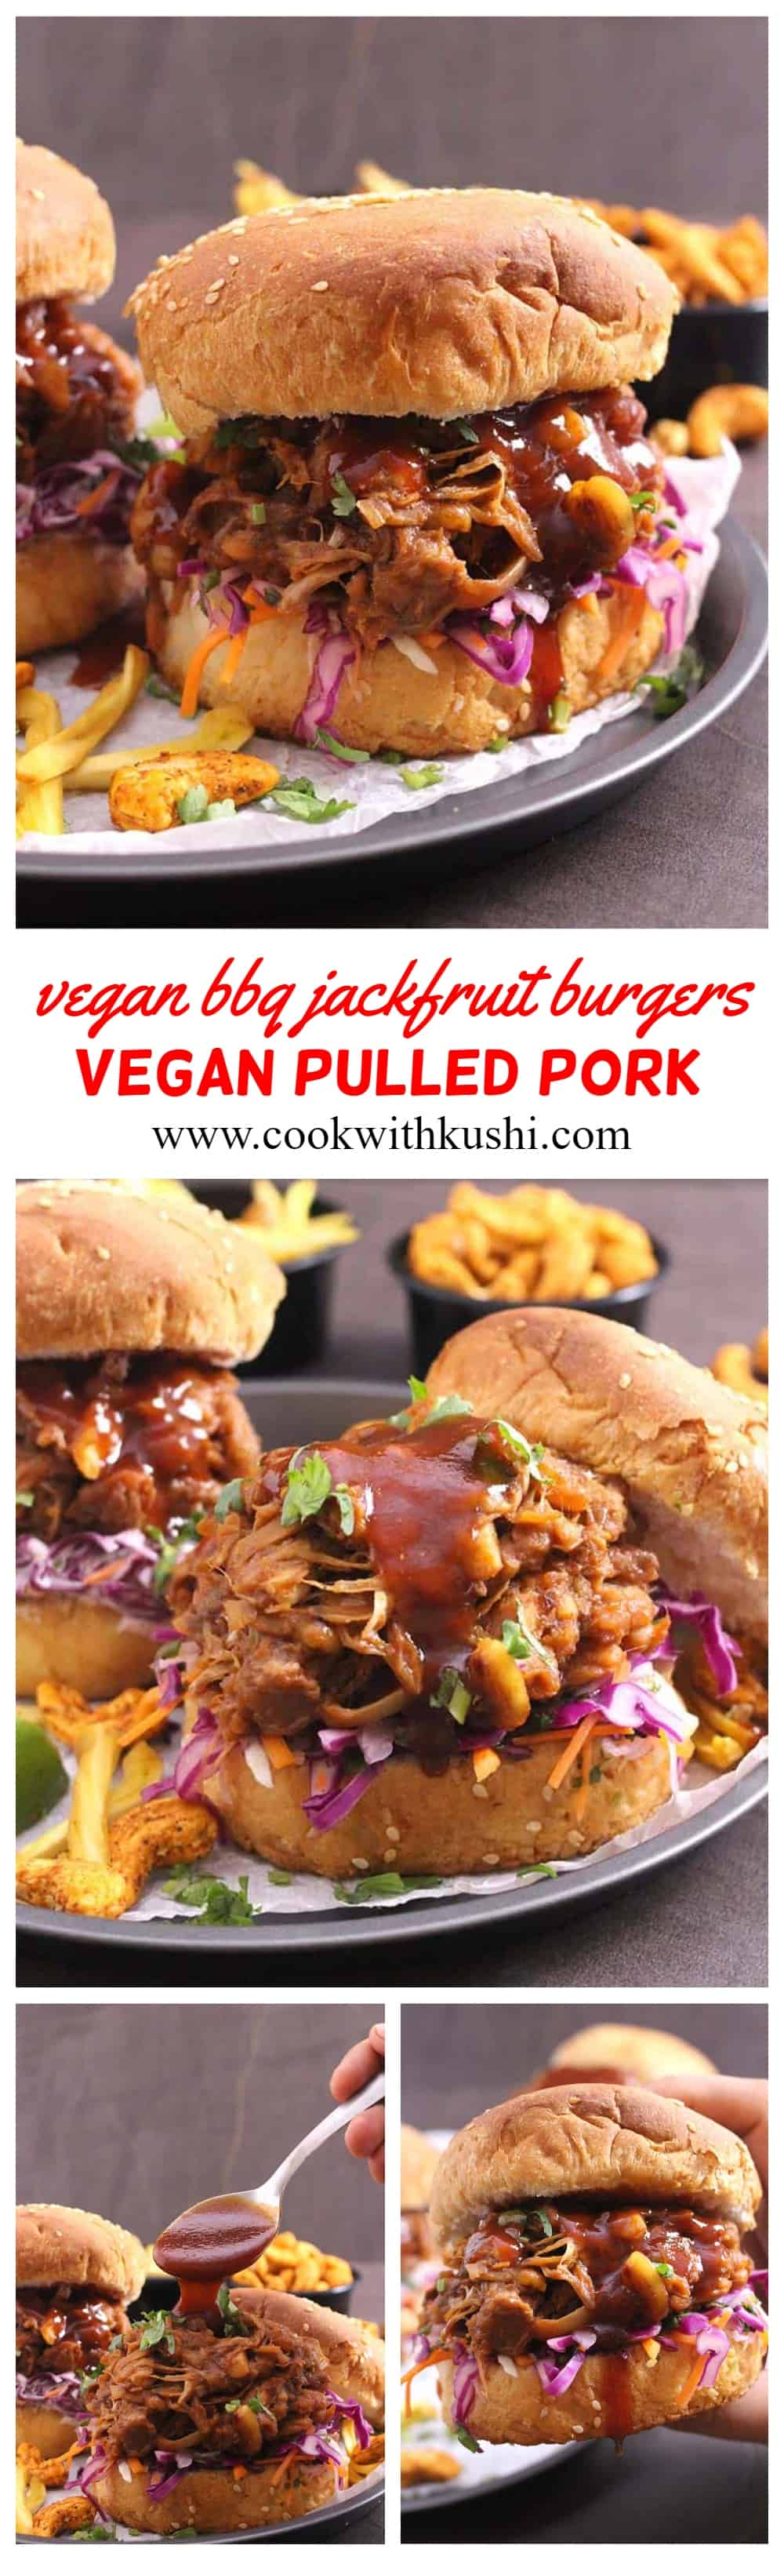 This Vegan BBQ Jackfruit Burger is super simple and easy to make, hearty and tender, smoky and satisfying, perfect summer recipe ready in less than 30 minutes with no actual barbecue required. #sliders #burgers #sandwiches #bestveganrecipes #Veggieburger #gyros #tortillas #wraps #superbowlfood #footballfood #summerfood #july4thfood #pulledpork #coleslaw #slowcooker #instantpot #stovetop #bbqsauce #younggreenjackfruit #canned #brine #impossibleburger